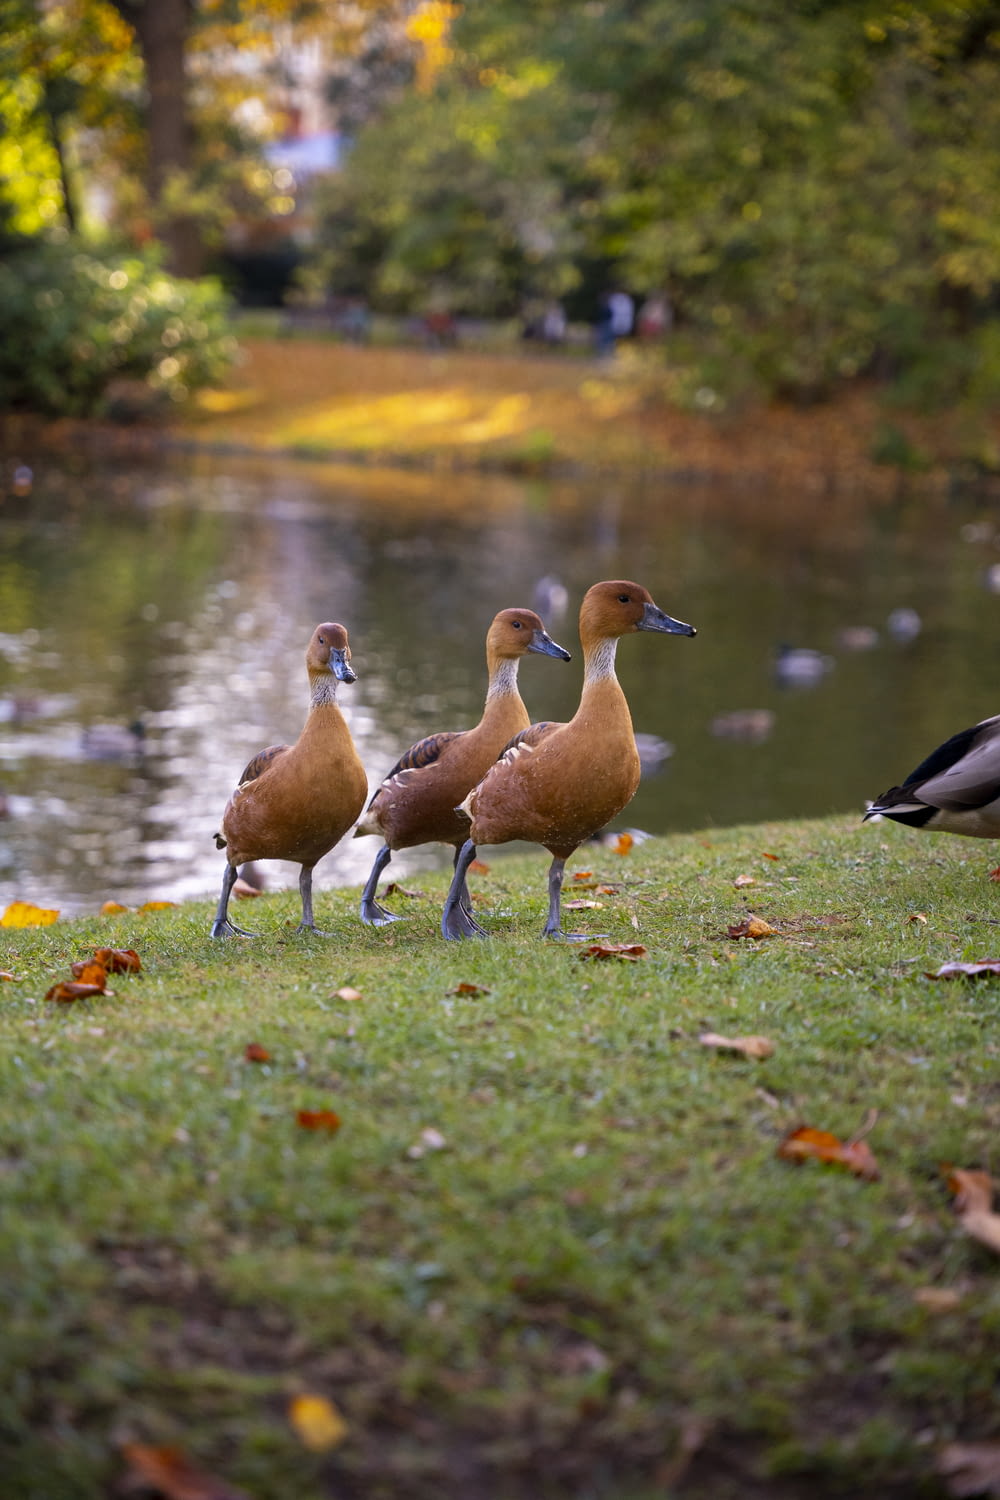 a group of ducks walking on grass by a pond